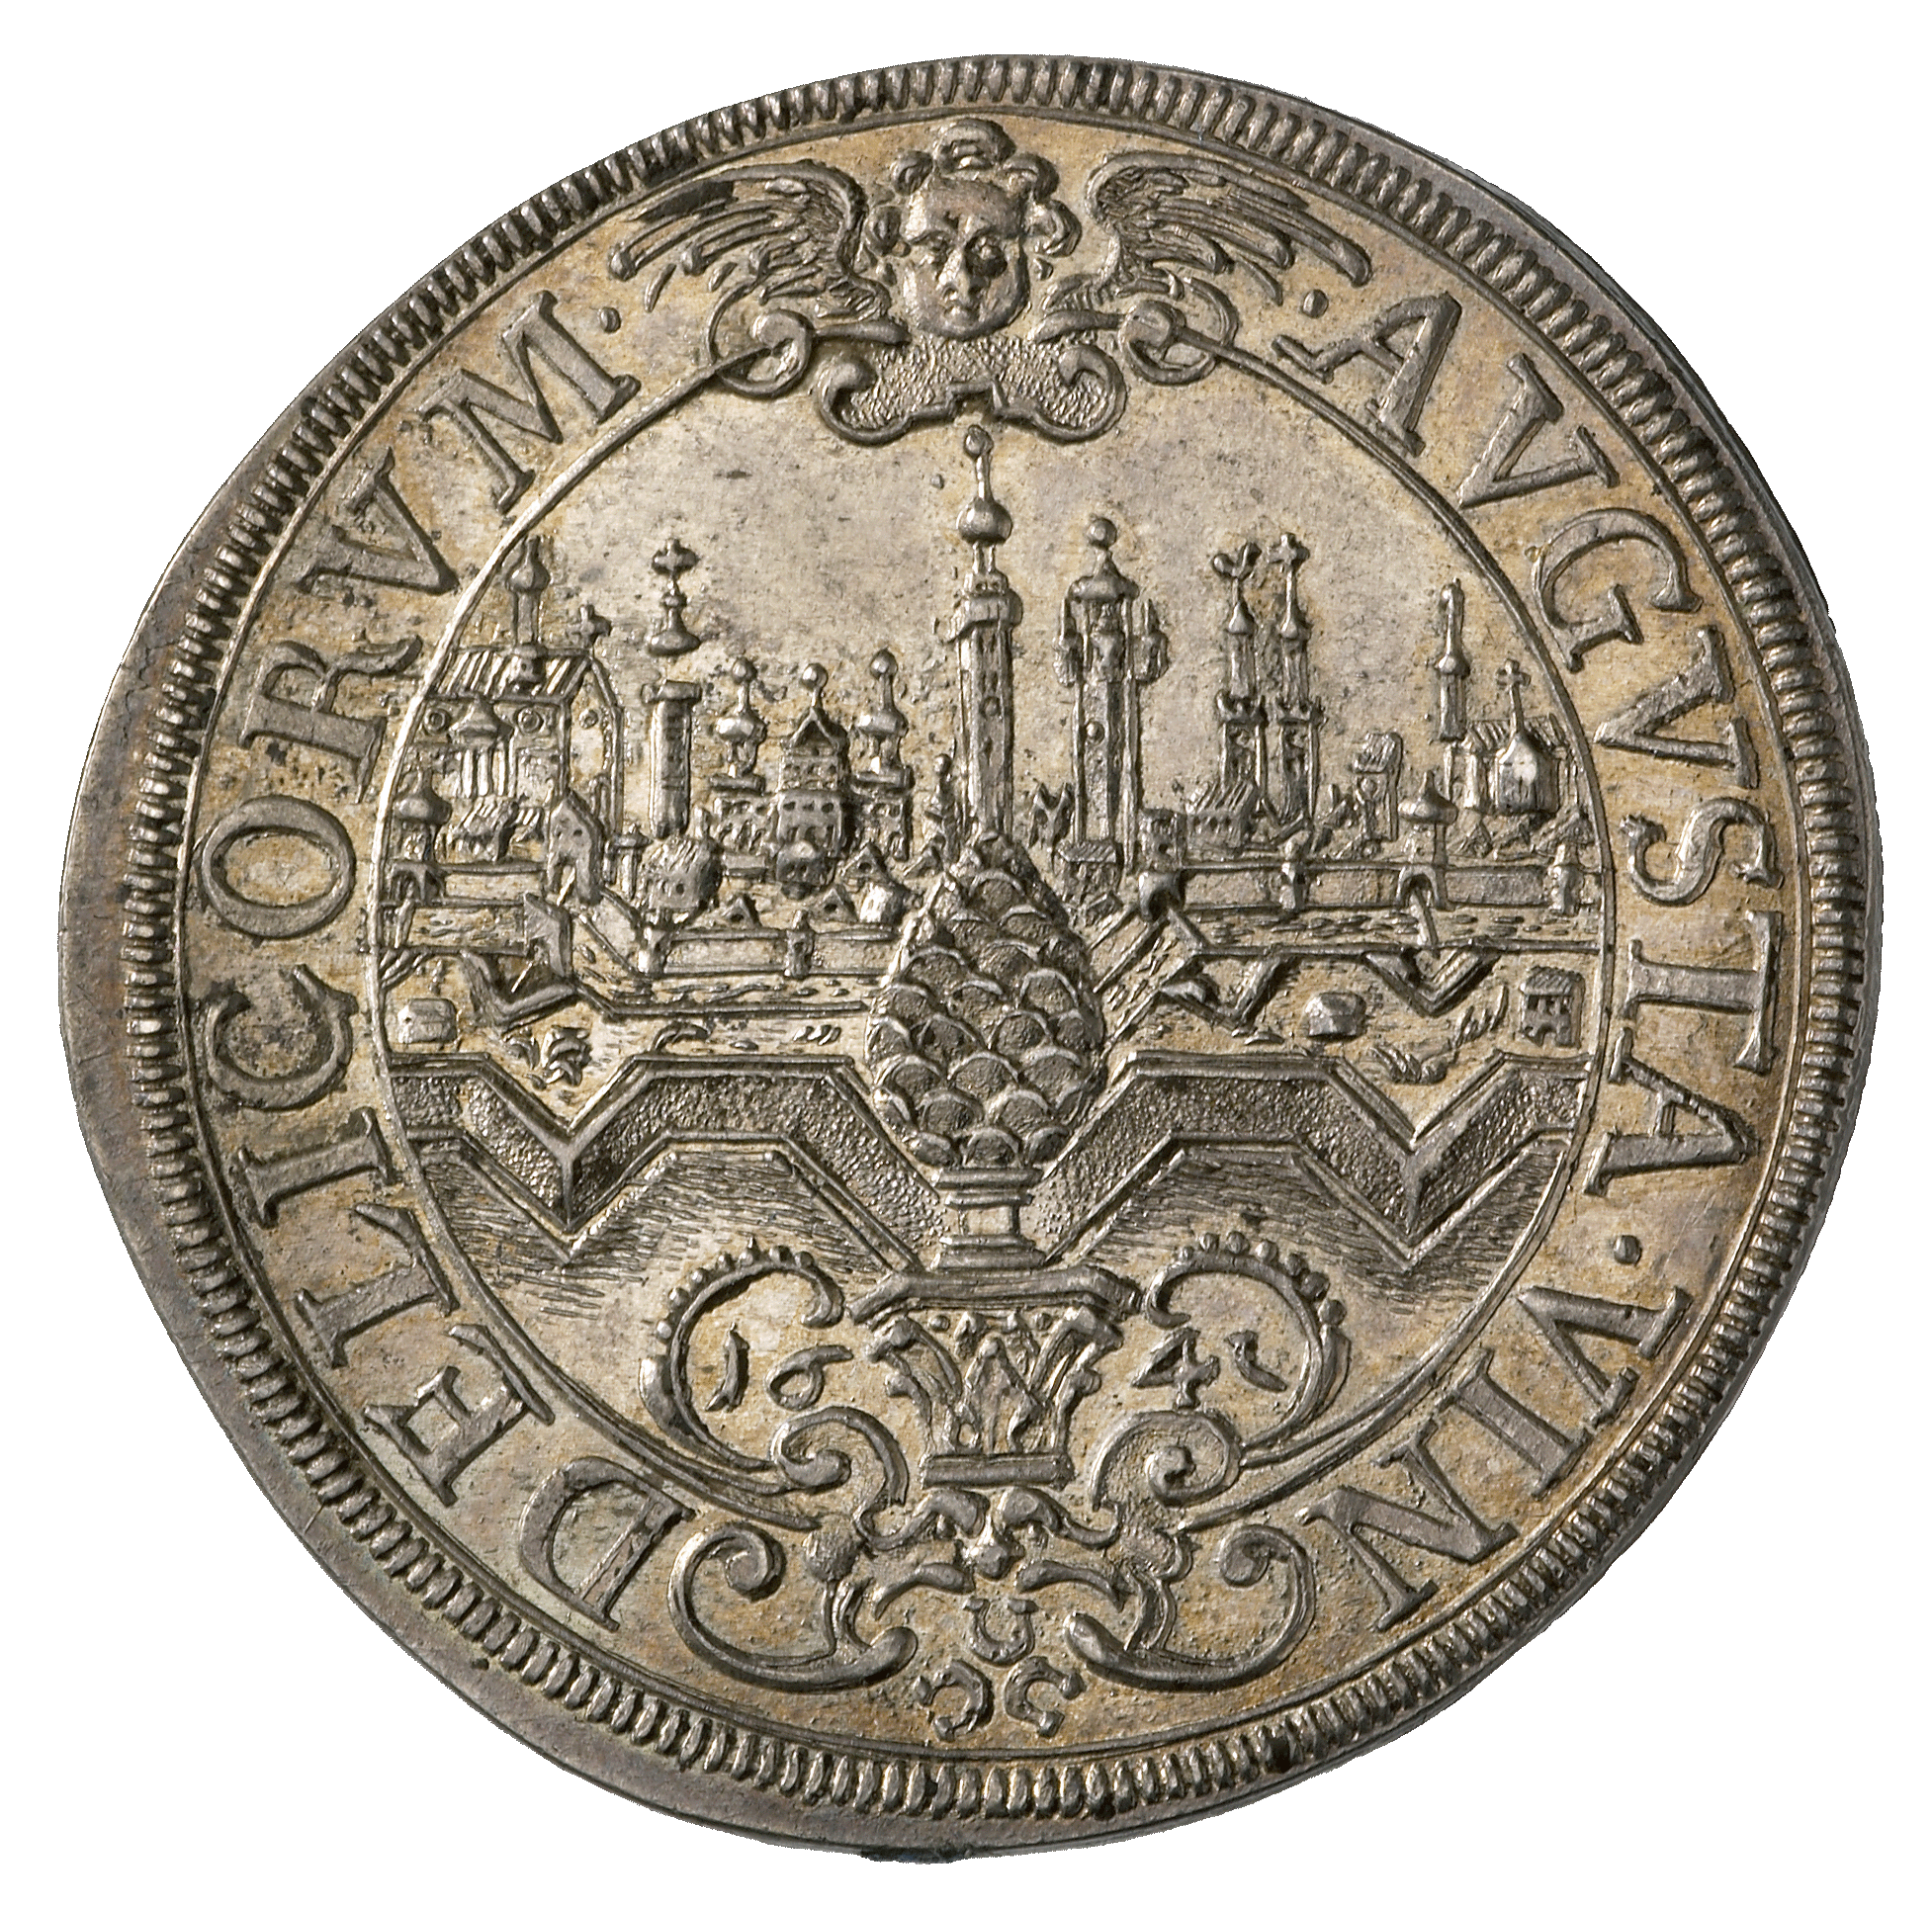 Holy Roman Empire, Imperial City of Augsburg, Taler 1641 (reverse)